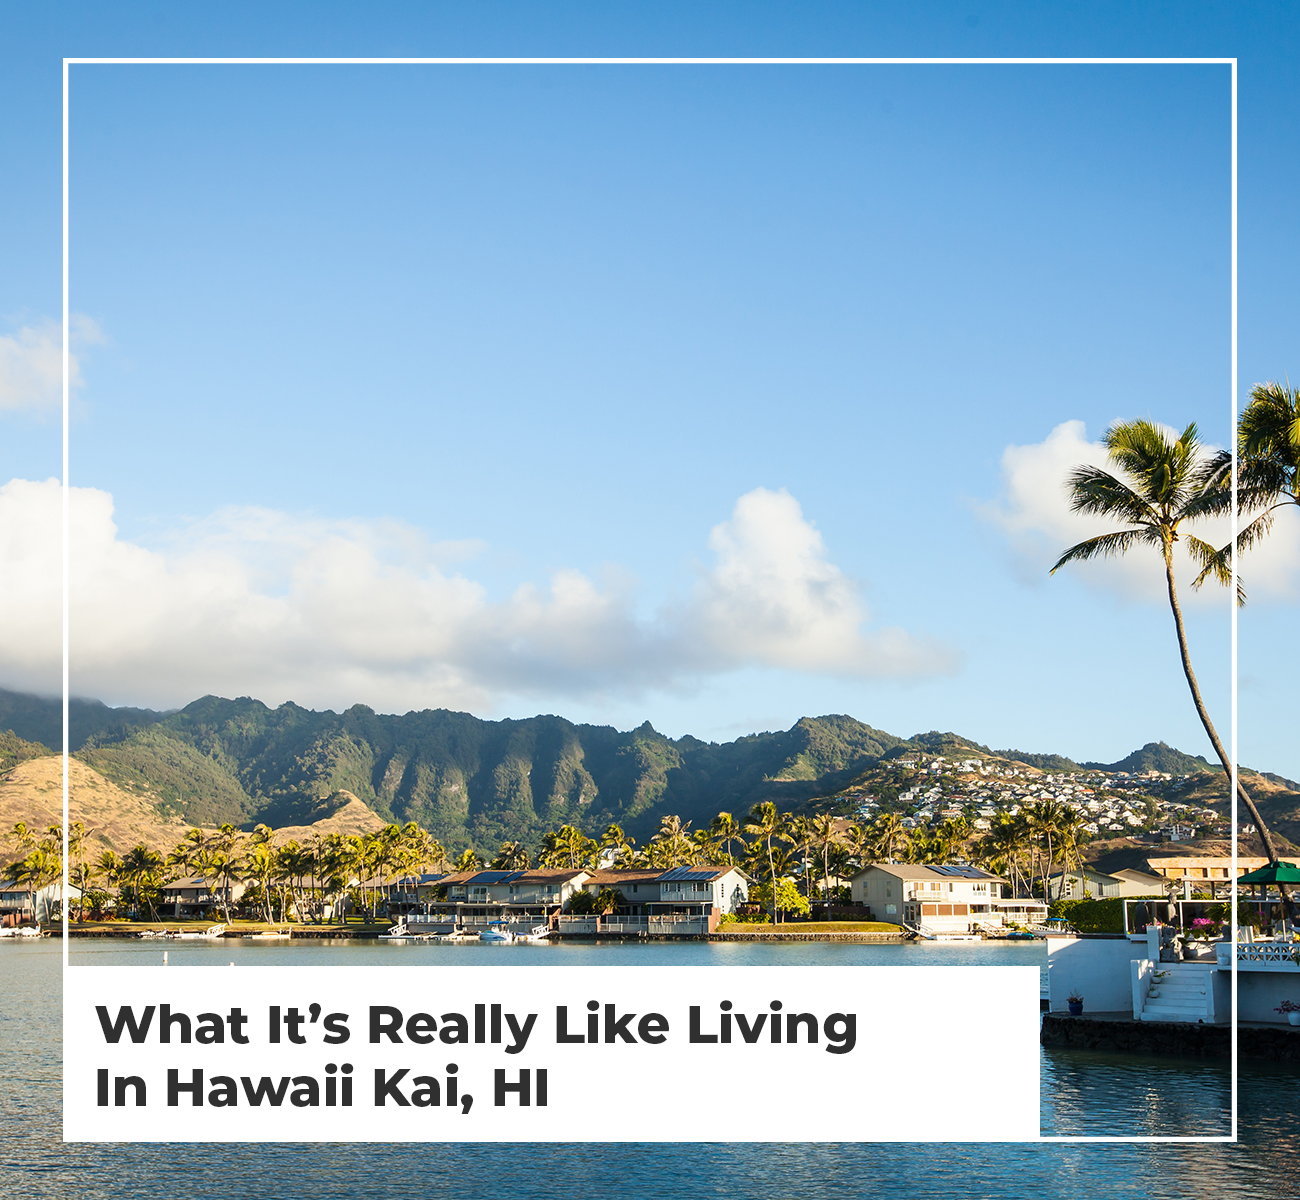 What It’s Really Like Living In Hawaii Kai